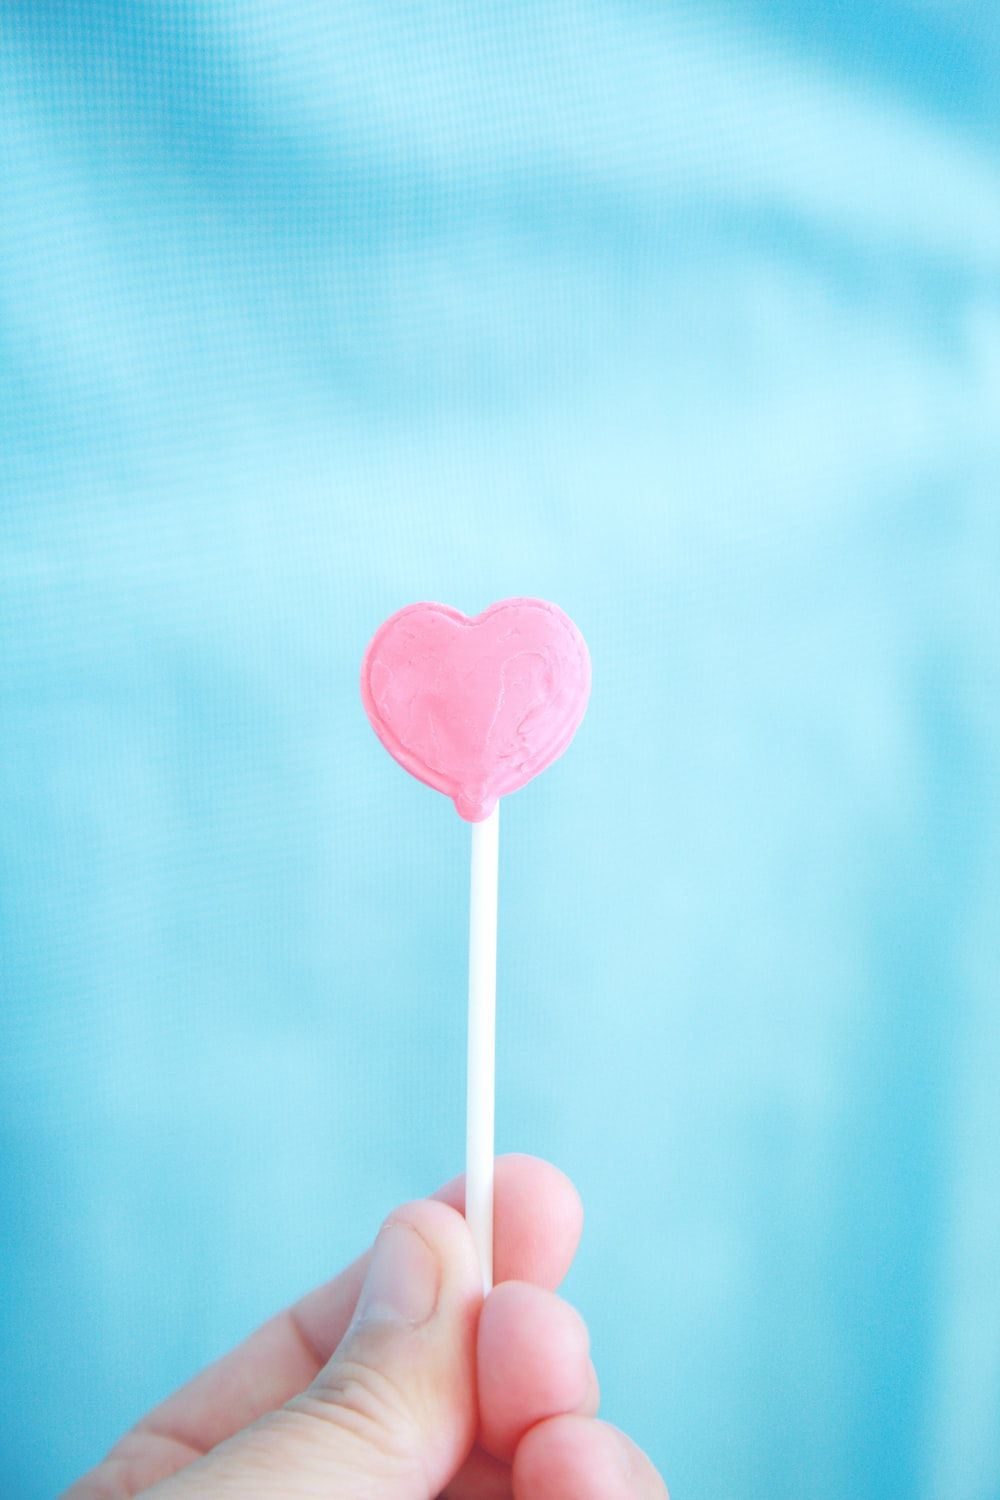 A person holding a pink heart shaped lollipop - Candy